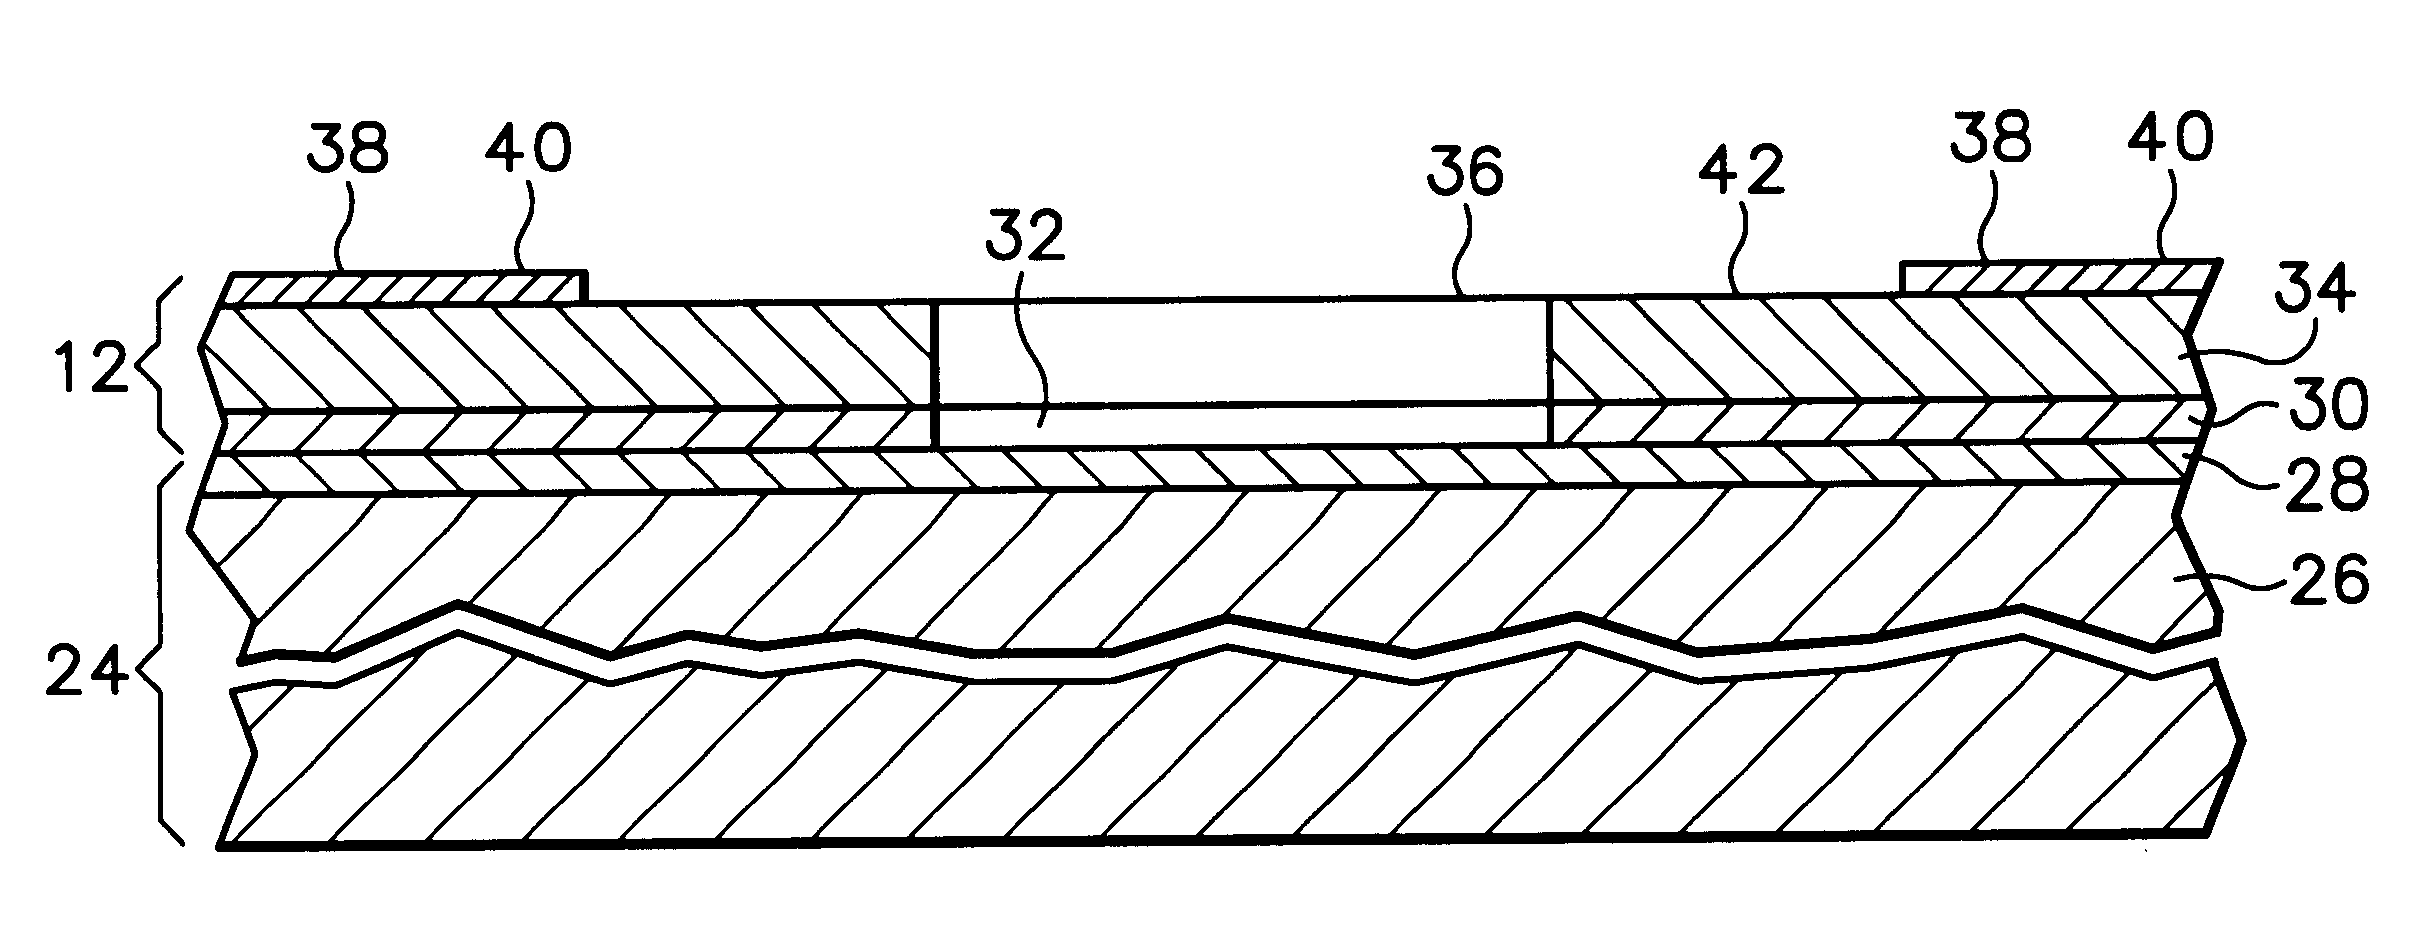 Addressable fuse array for circuits and mechanical devices